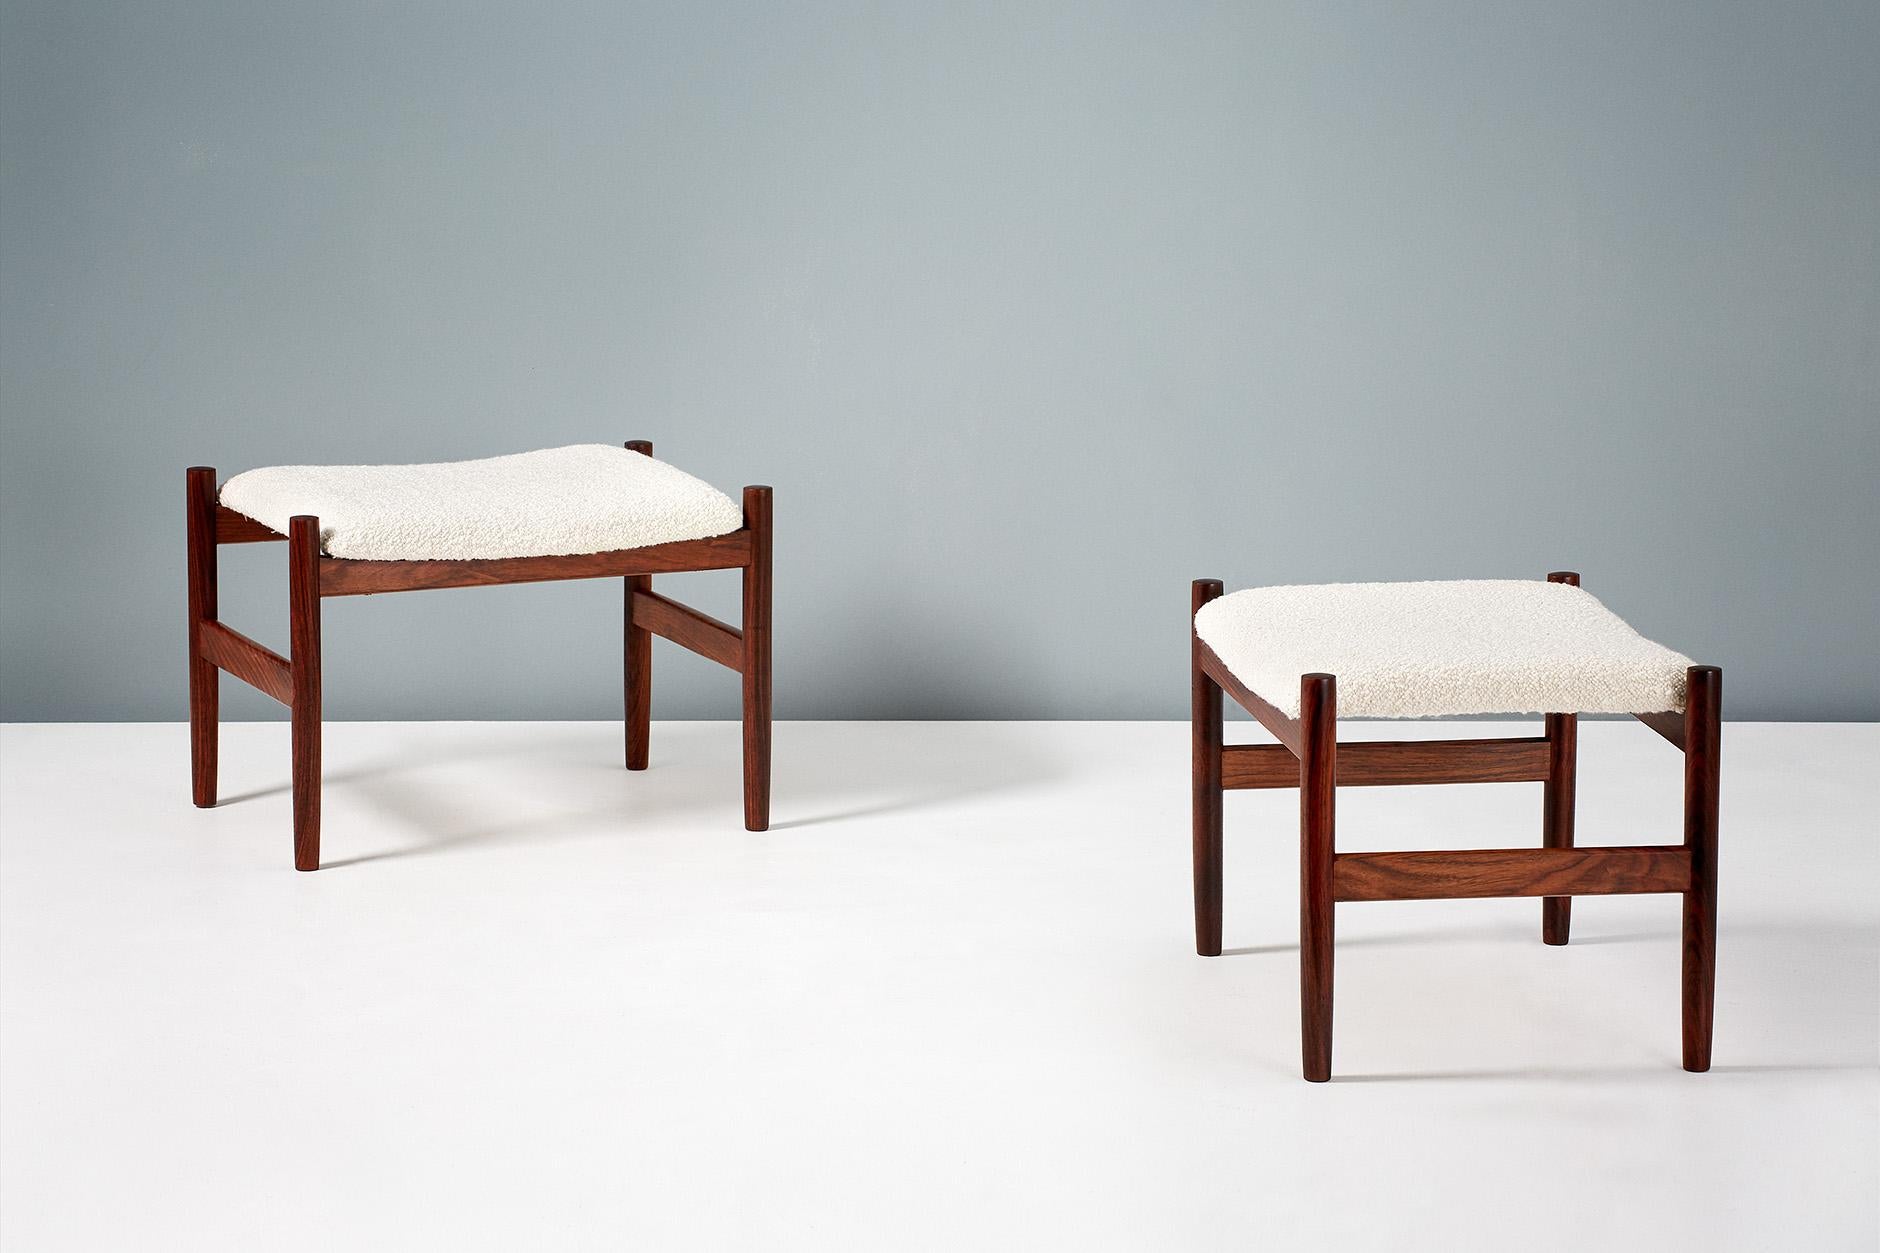 Pair of vintage stools by Danish producer Spottrup Mobler. Seats have been reupholstered in luxurious bouclé wool fabric. Produced circa 1960. Frames made from solid rosewood.